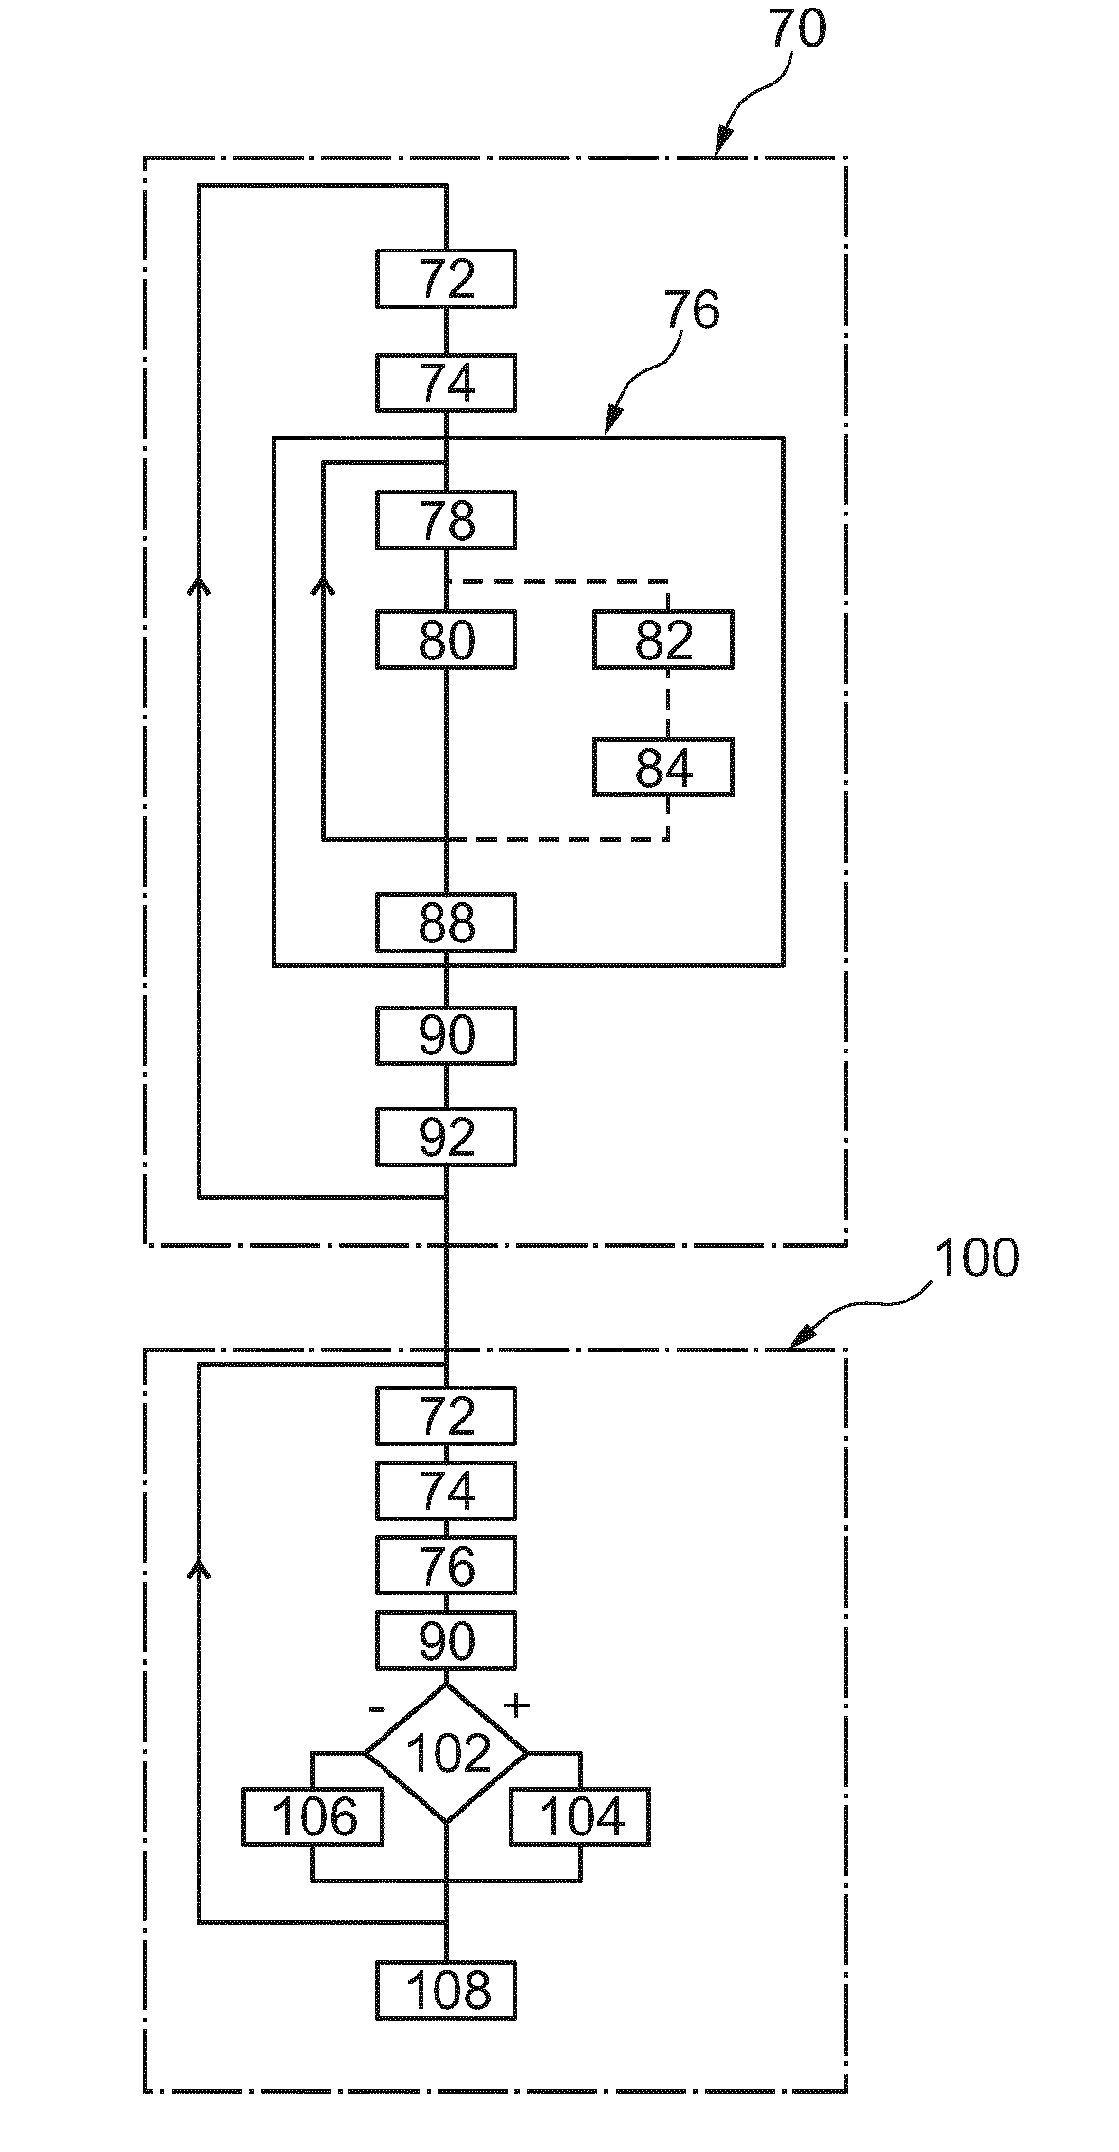 Method for automatic recognition of a mobile magnetic object